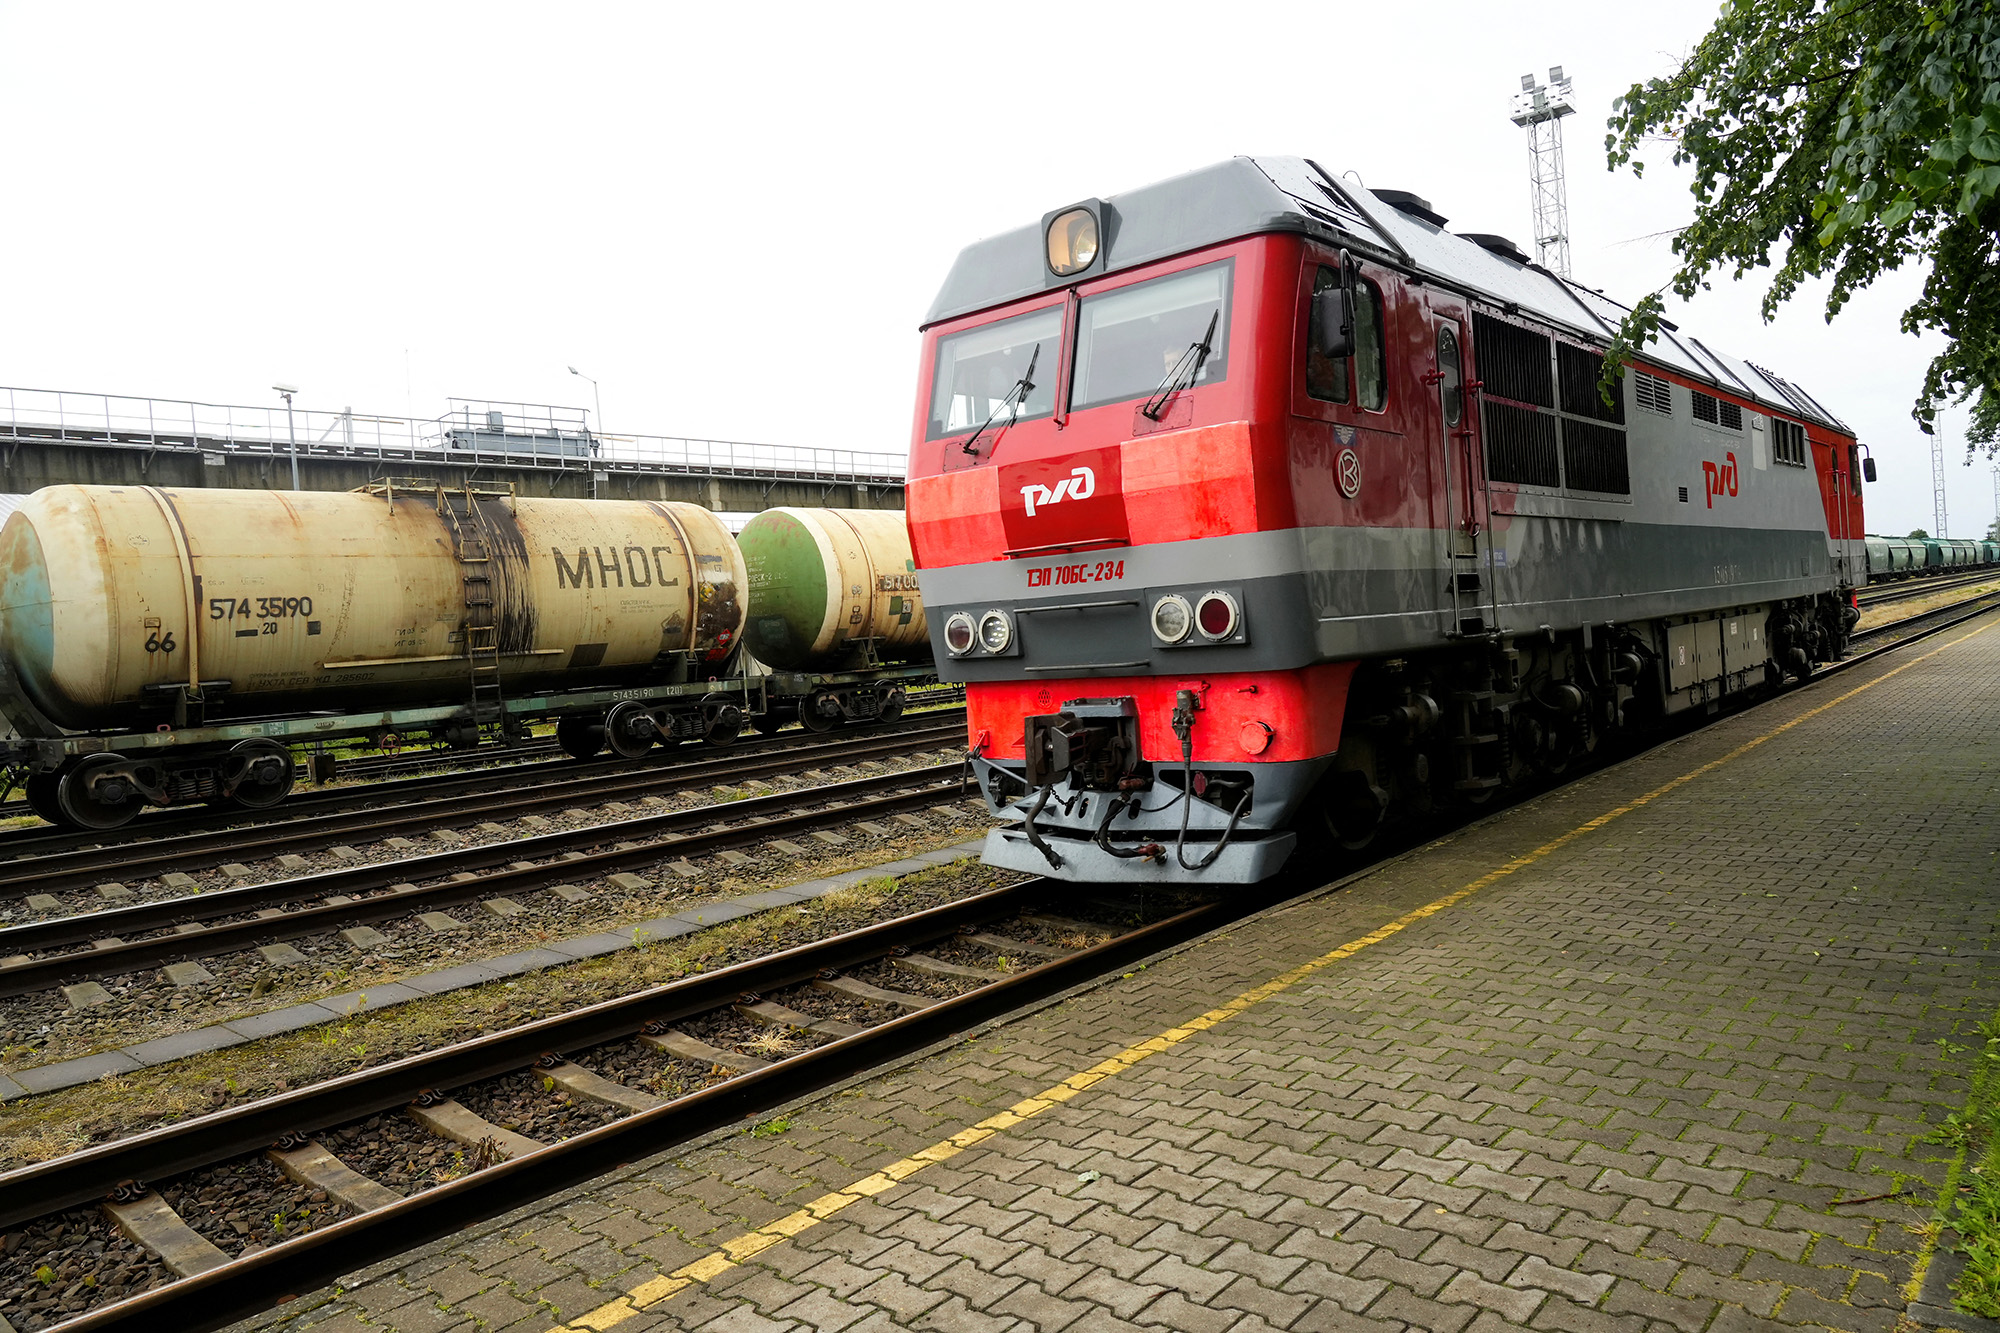 A Russian railway locomotive moves past freight train wagons at the border railway station in Kybartai, Lithuania, on June 21.